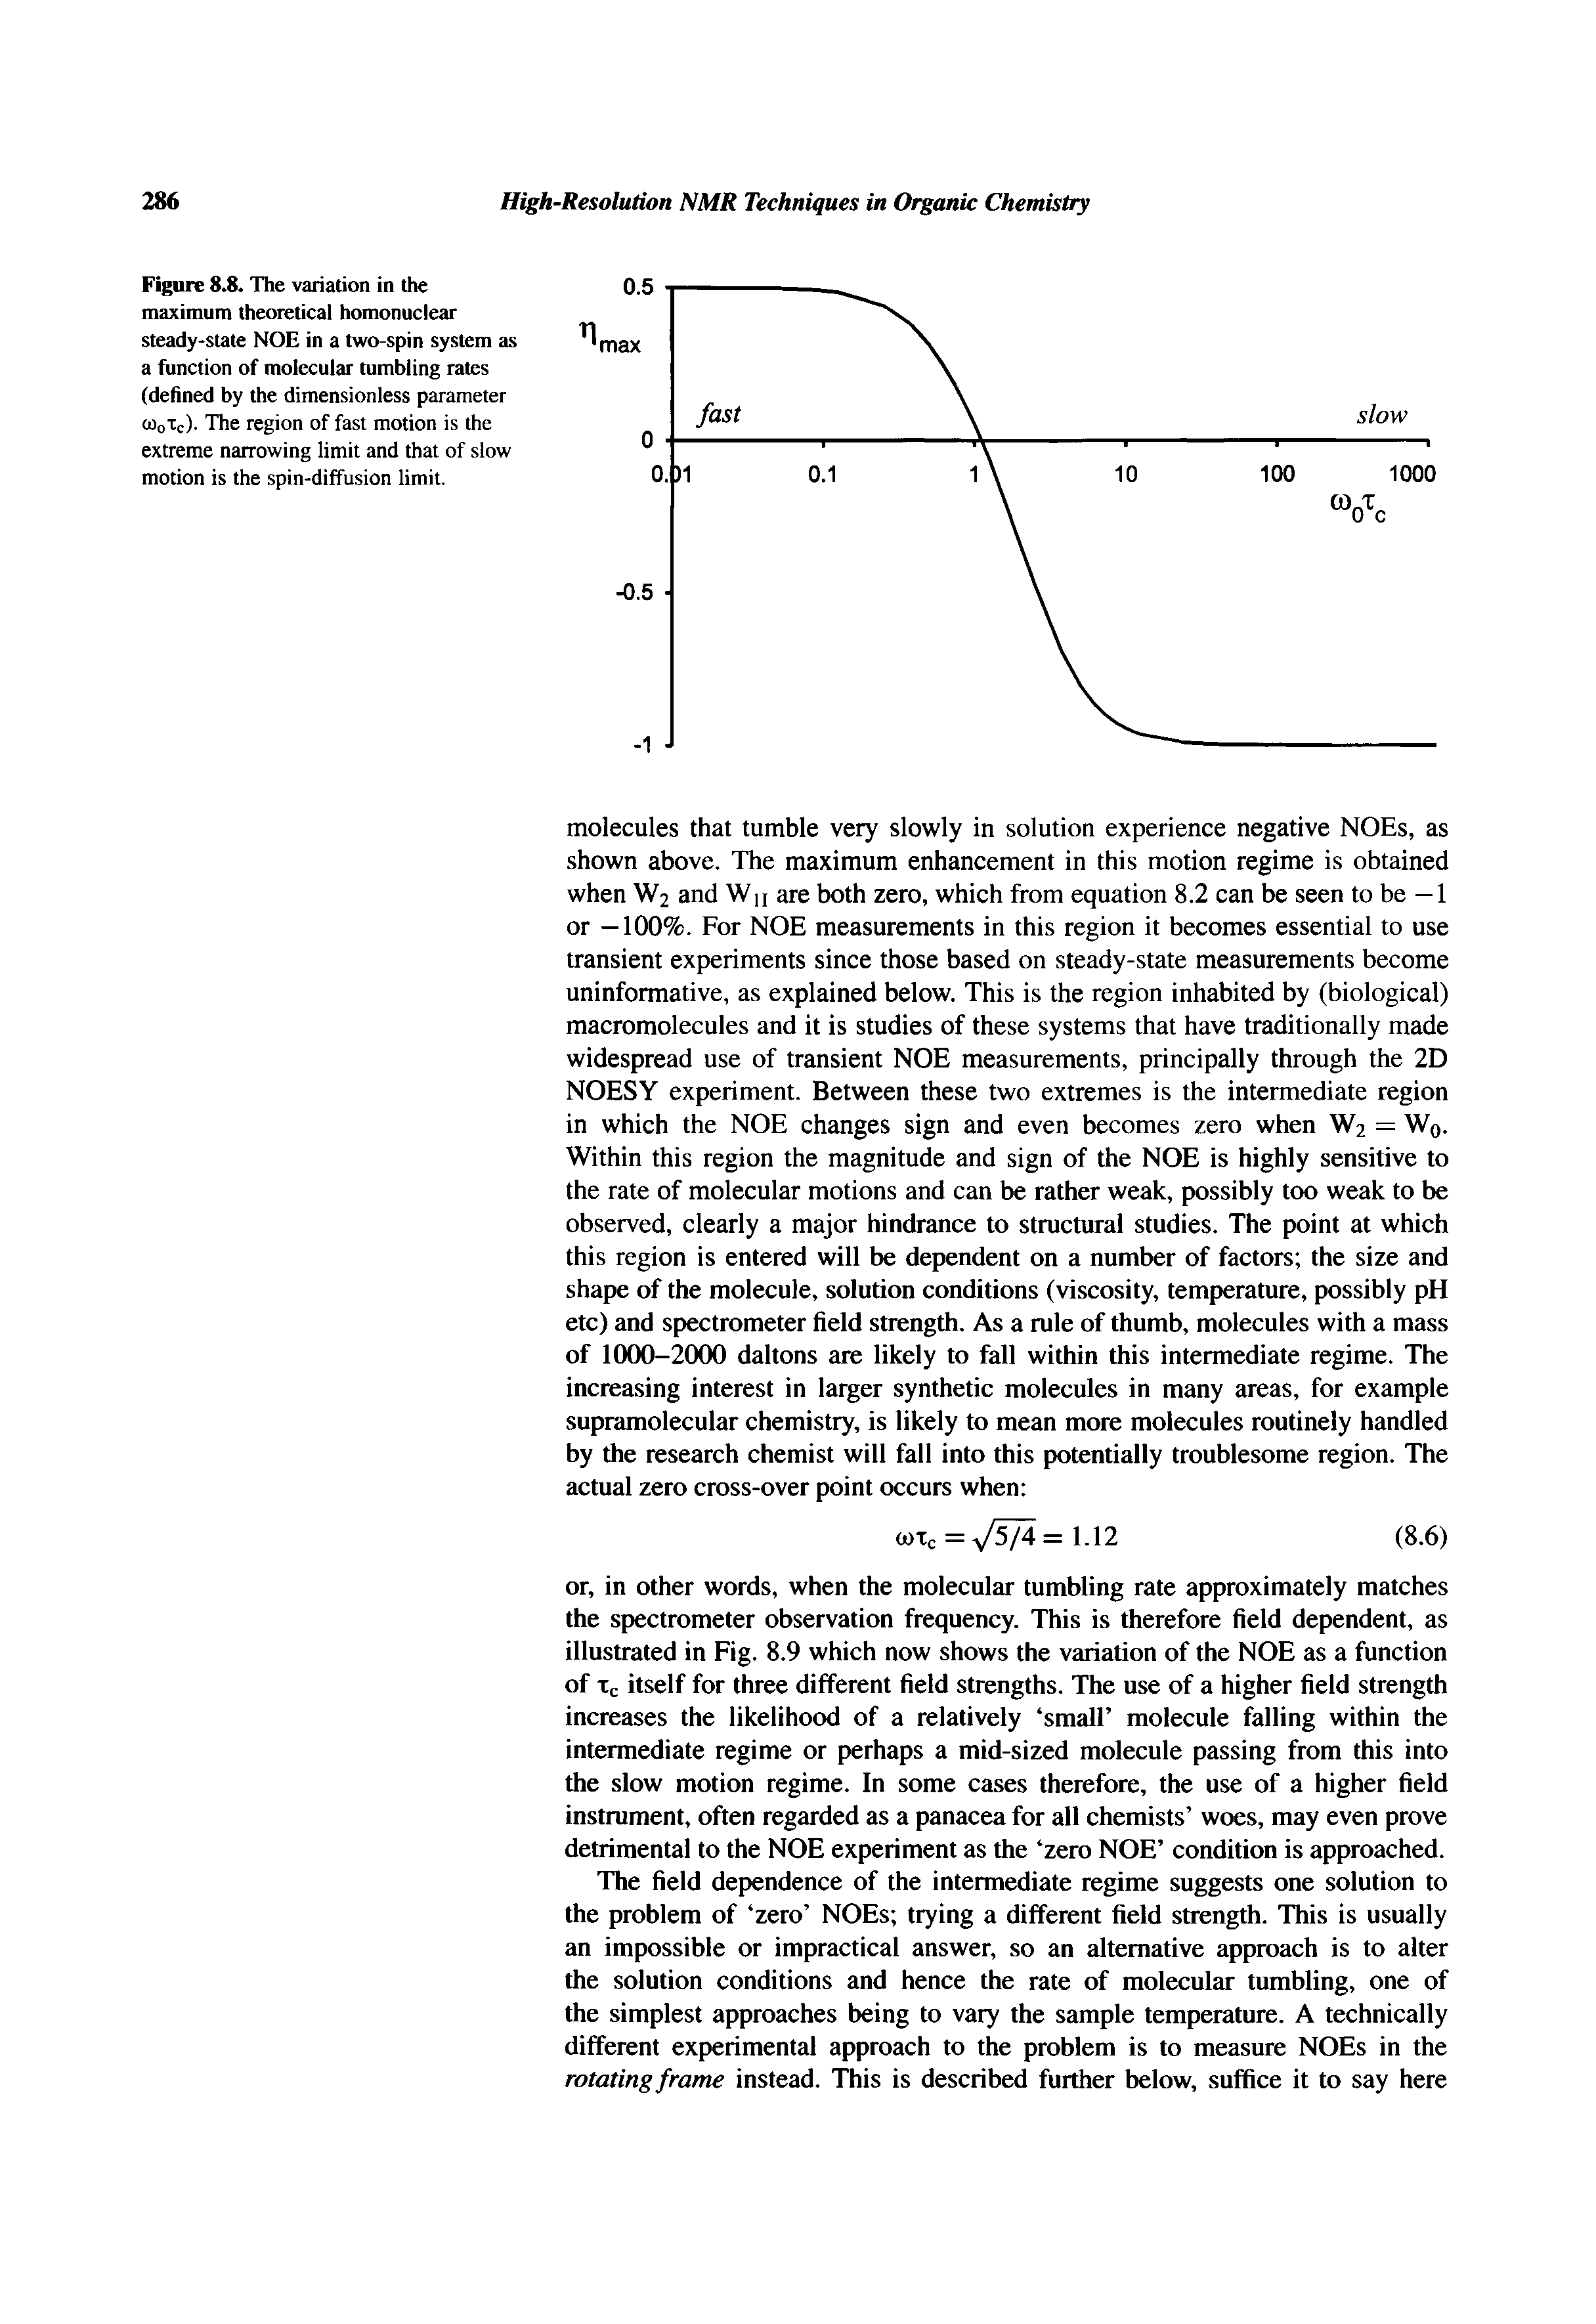 Figure 8.8. The variation in the maximum theoretical homonuclear steady-state NOE in a two-spin system as a function of molecular tumbling rates (defined by the dimensionless parameter cOoTc). The region of fast motion is the extreme narrowing limit and that of slow motion is the spin-diffusion limit.